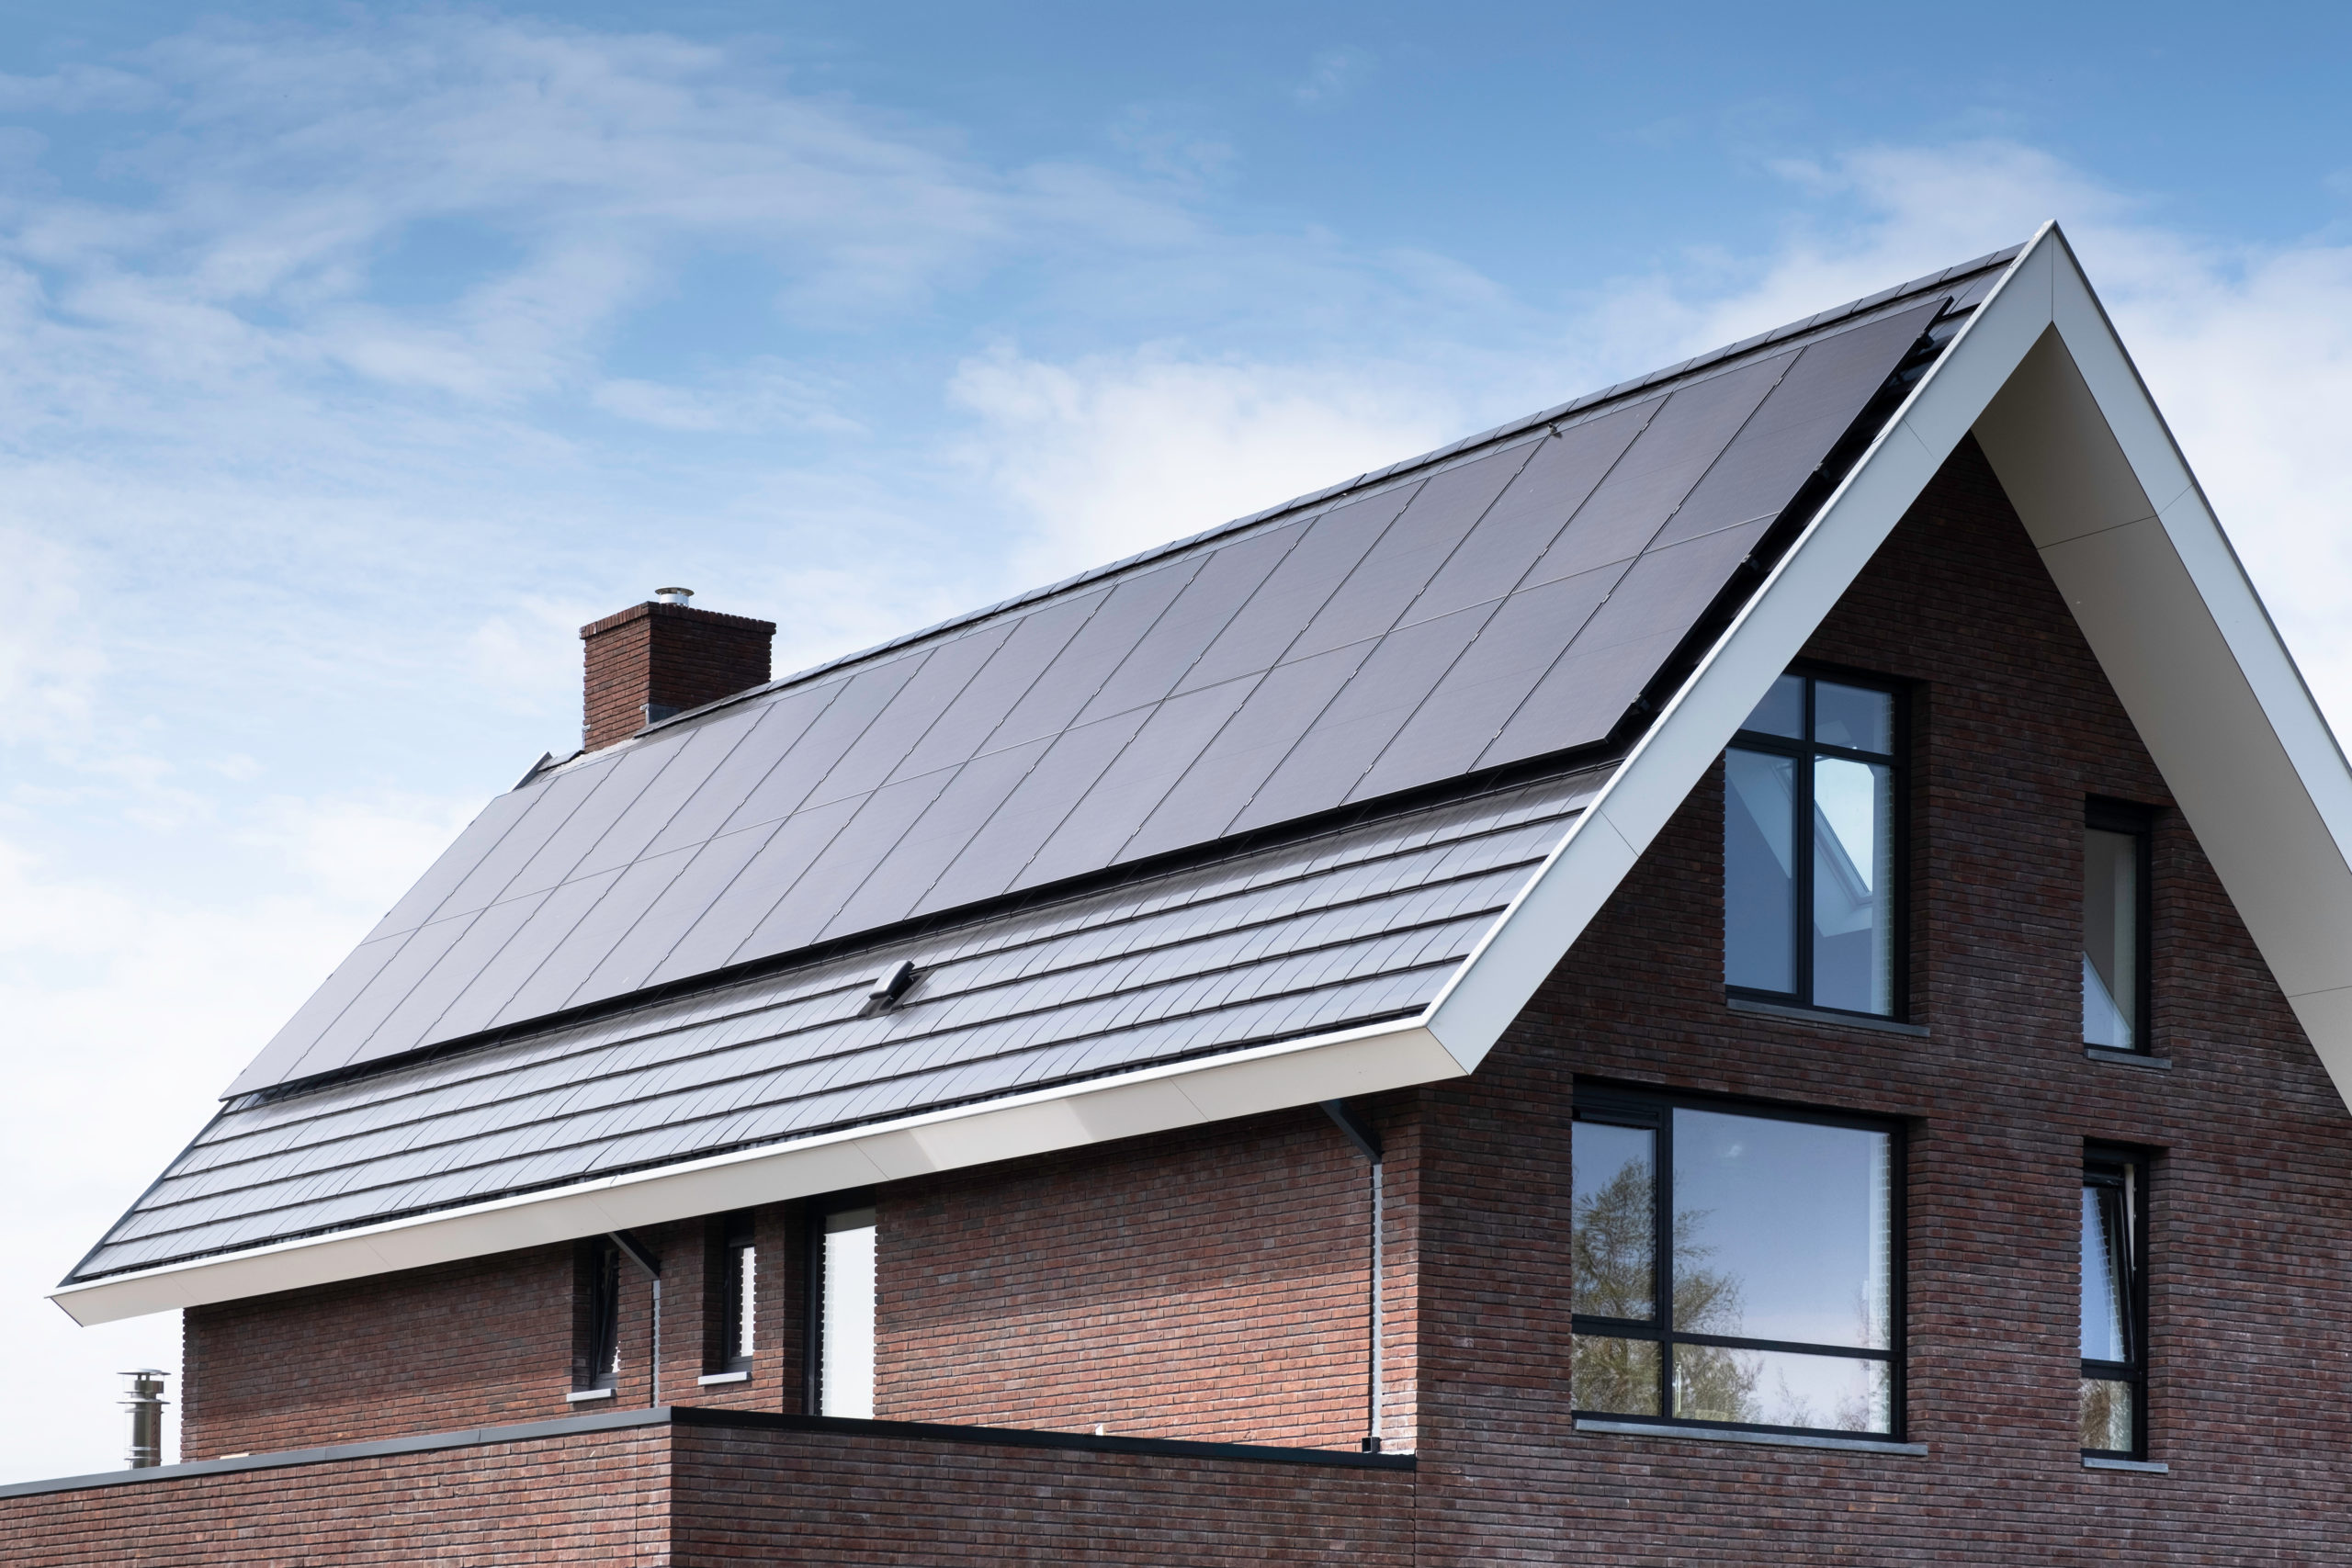 Should You Buy A Home with Solar Panels?